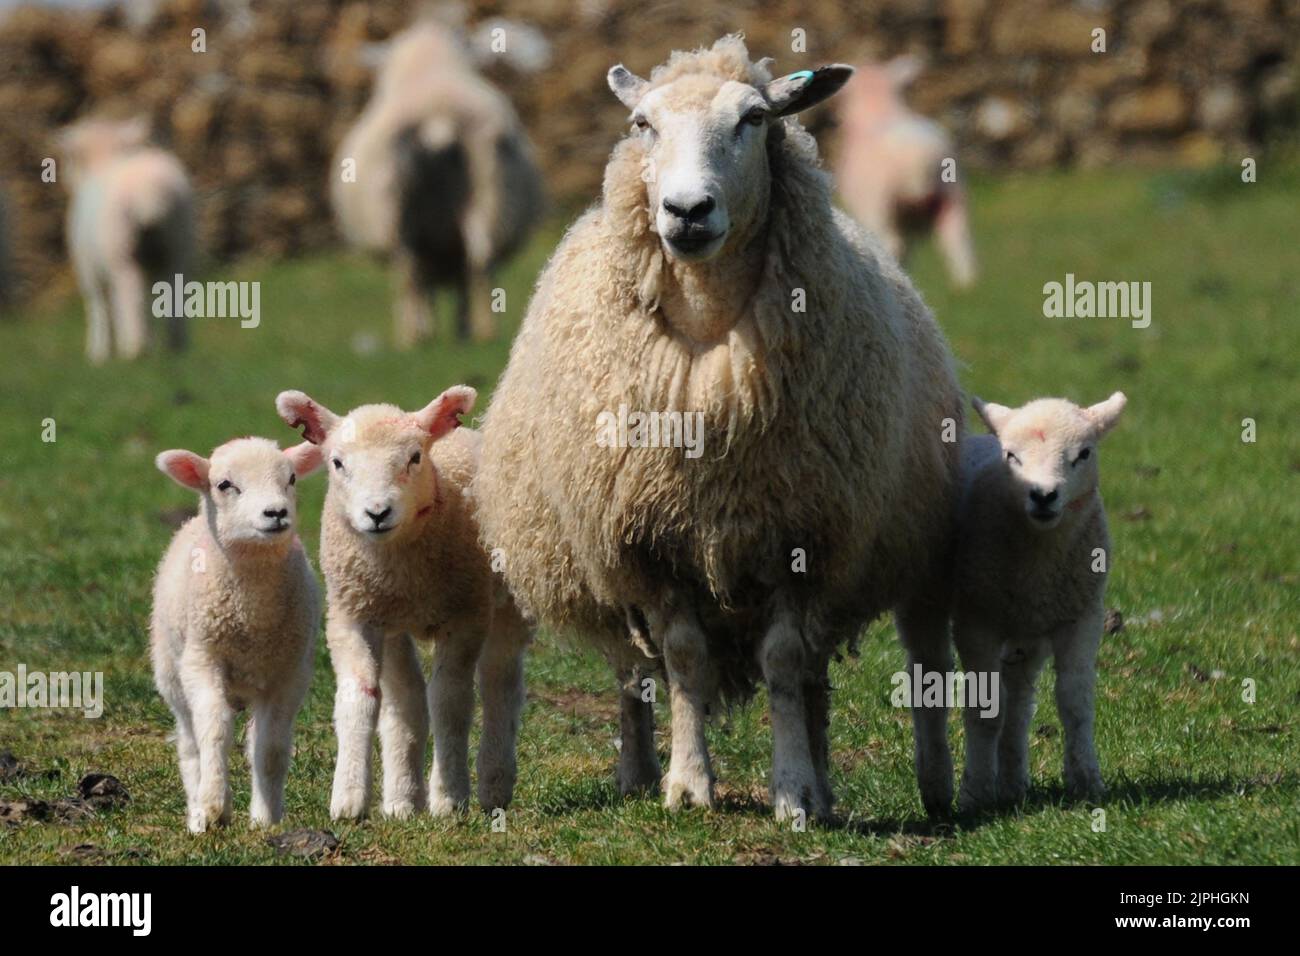 SHEEP, EWE AND LAMBS AT ABBOTSBURY, DORSET  MIKE WALKER PICTURES, 2010 Stock Photo